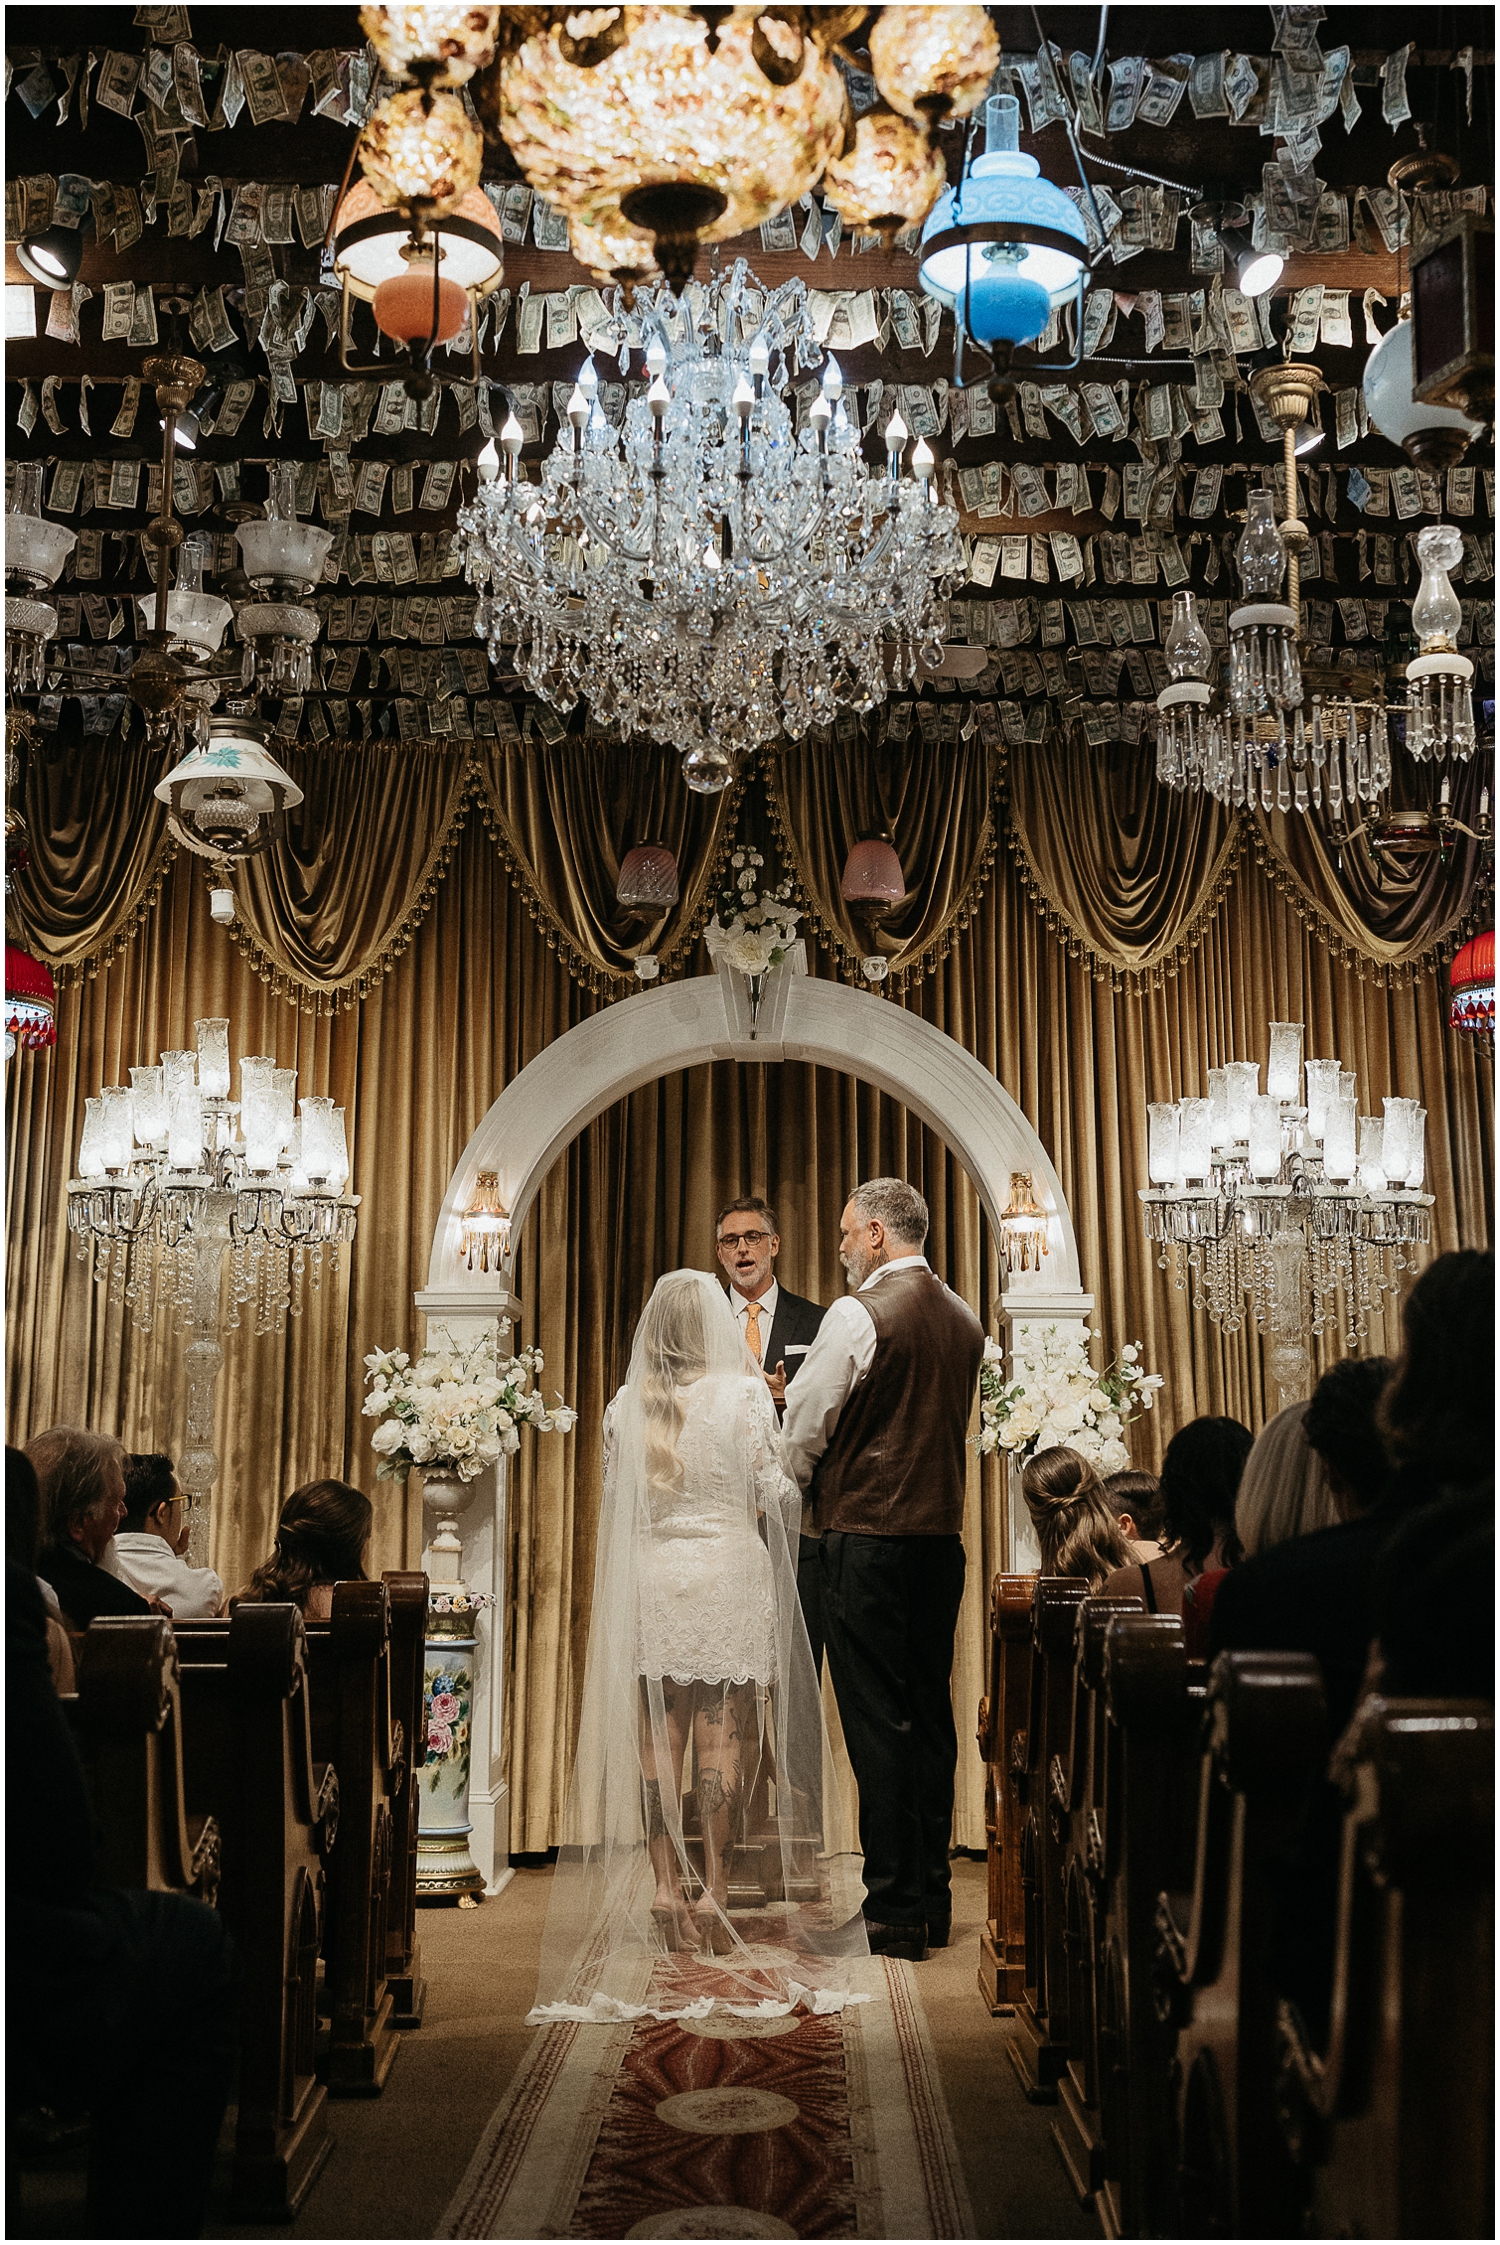 A couple stands under a white arch at the French Quarter Wedding Chapel.